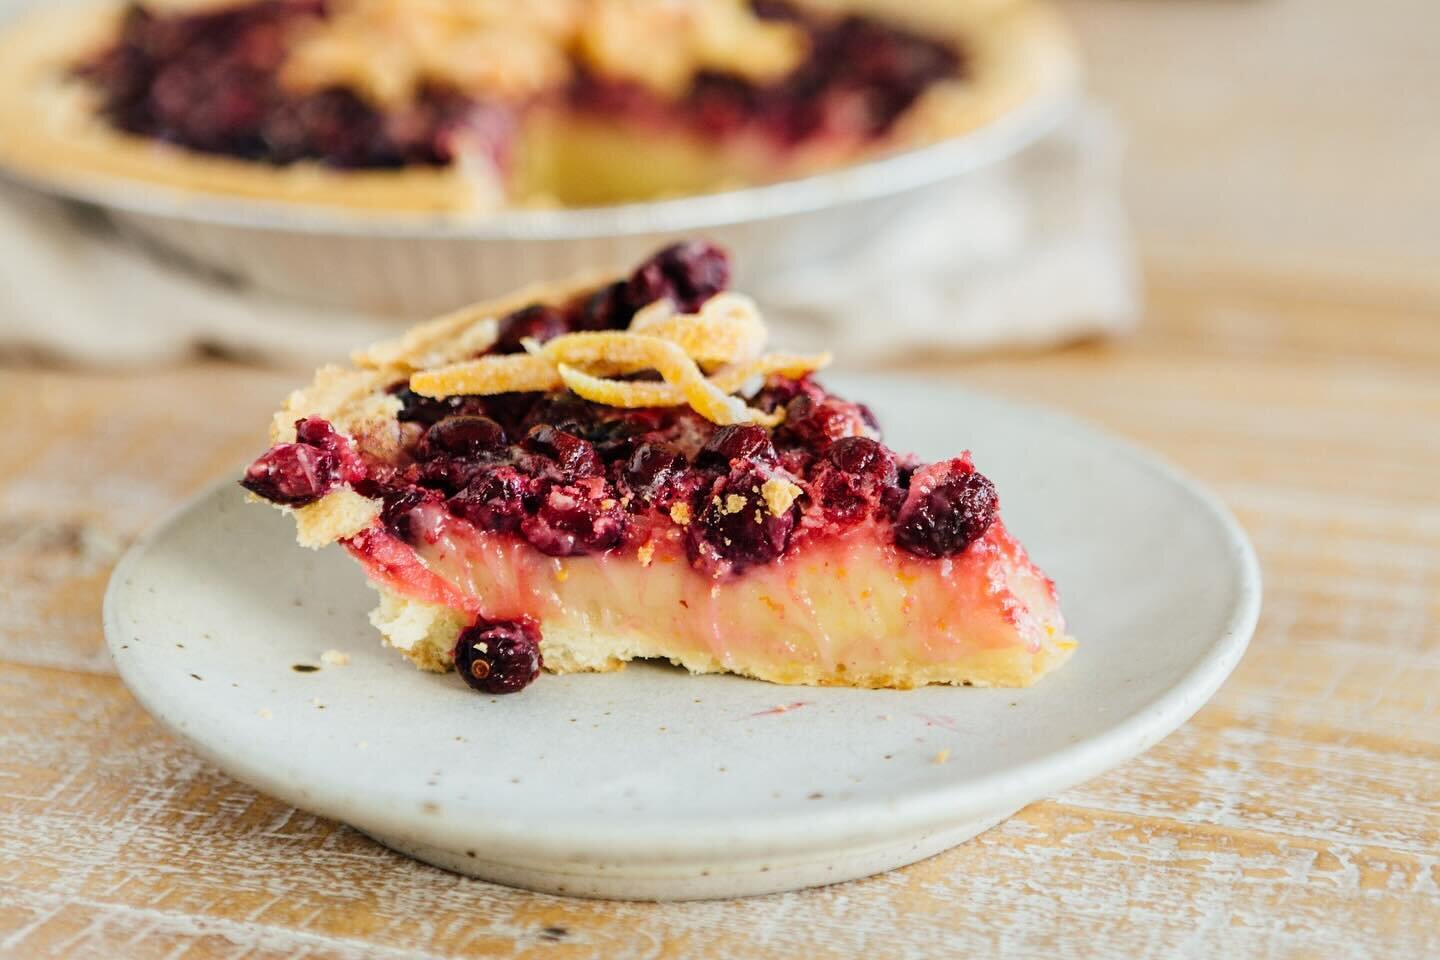 👋Cranberry Orange Chess Pie!

A Southern chess pie on the lighter, and tangier side. This chess pie is bright in flavor and color! Fresh cranberries that pop with tang in a light filling with a hint of orange. Voted one of the finest pies in America